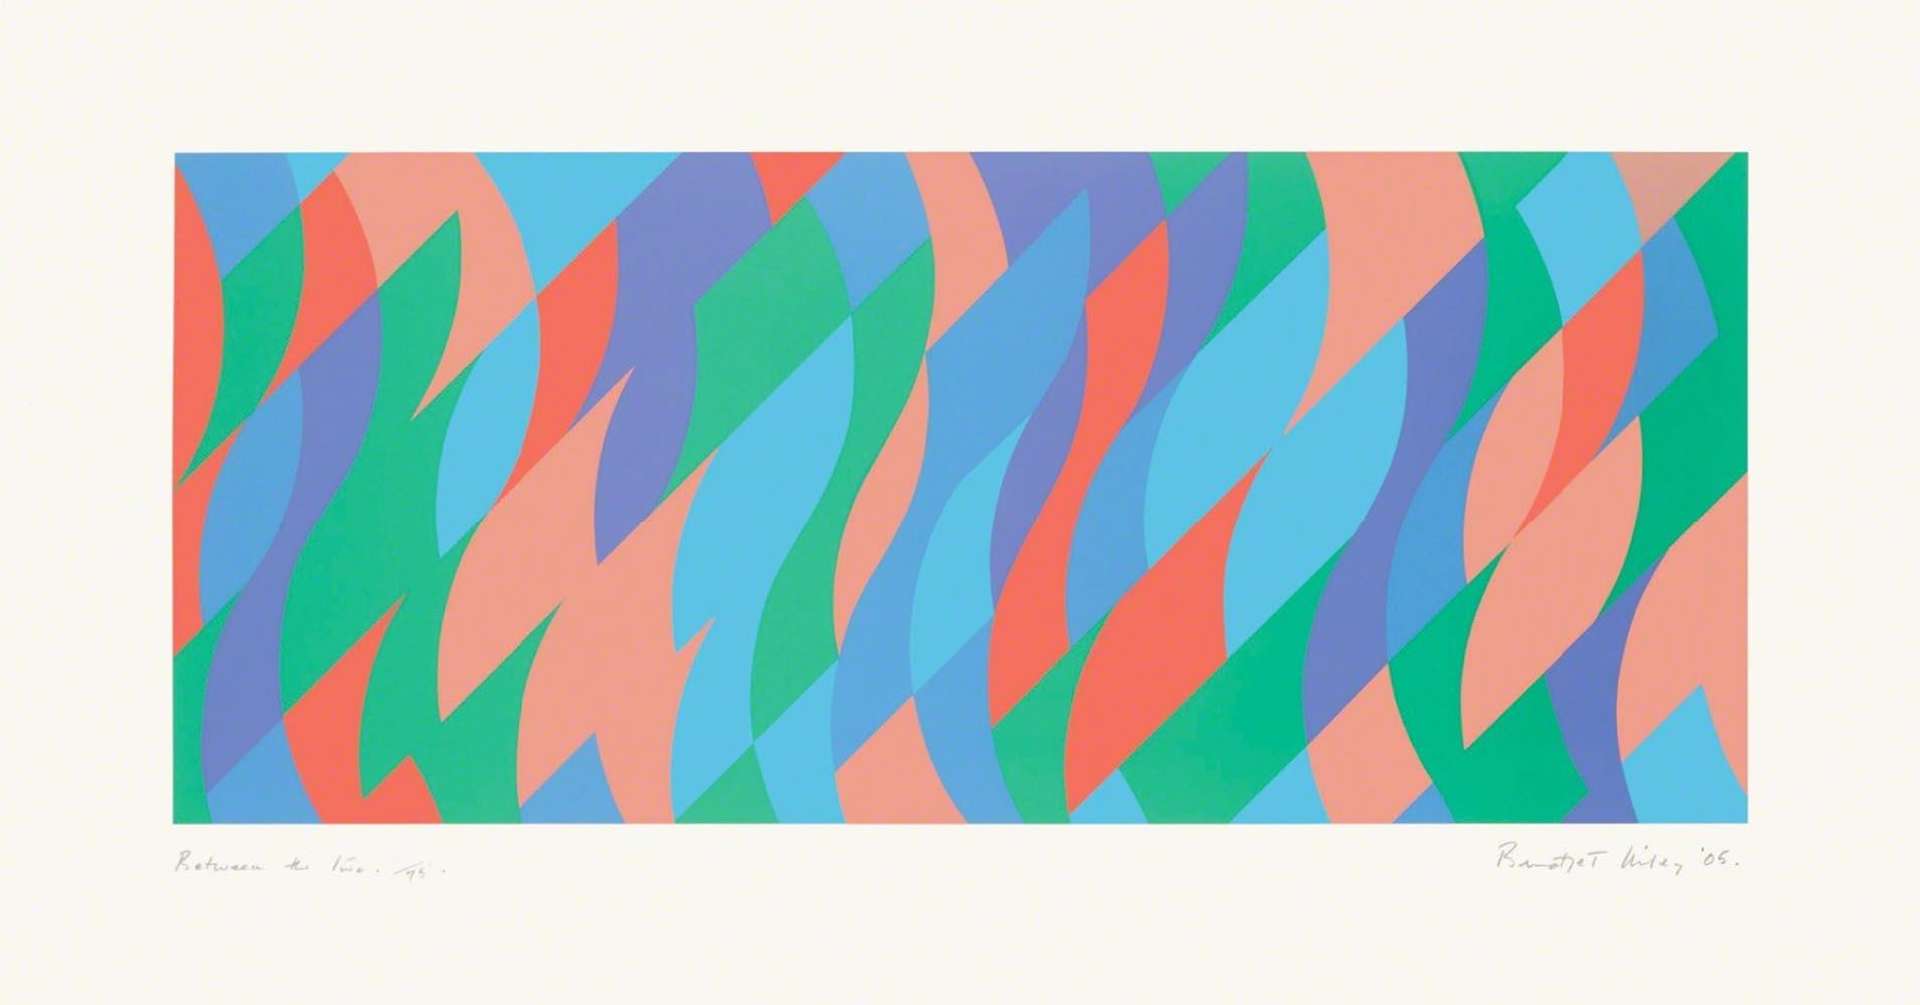 A screeprint by Bridget Riley depicting a pattern of abstract shapes in orange, blue, green, and purple.